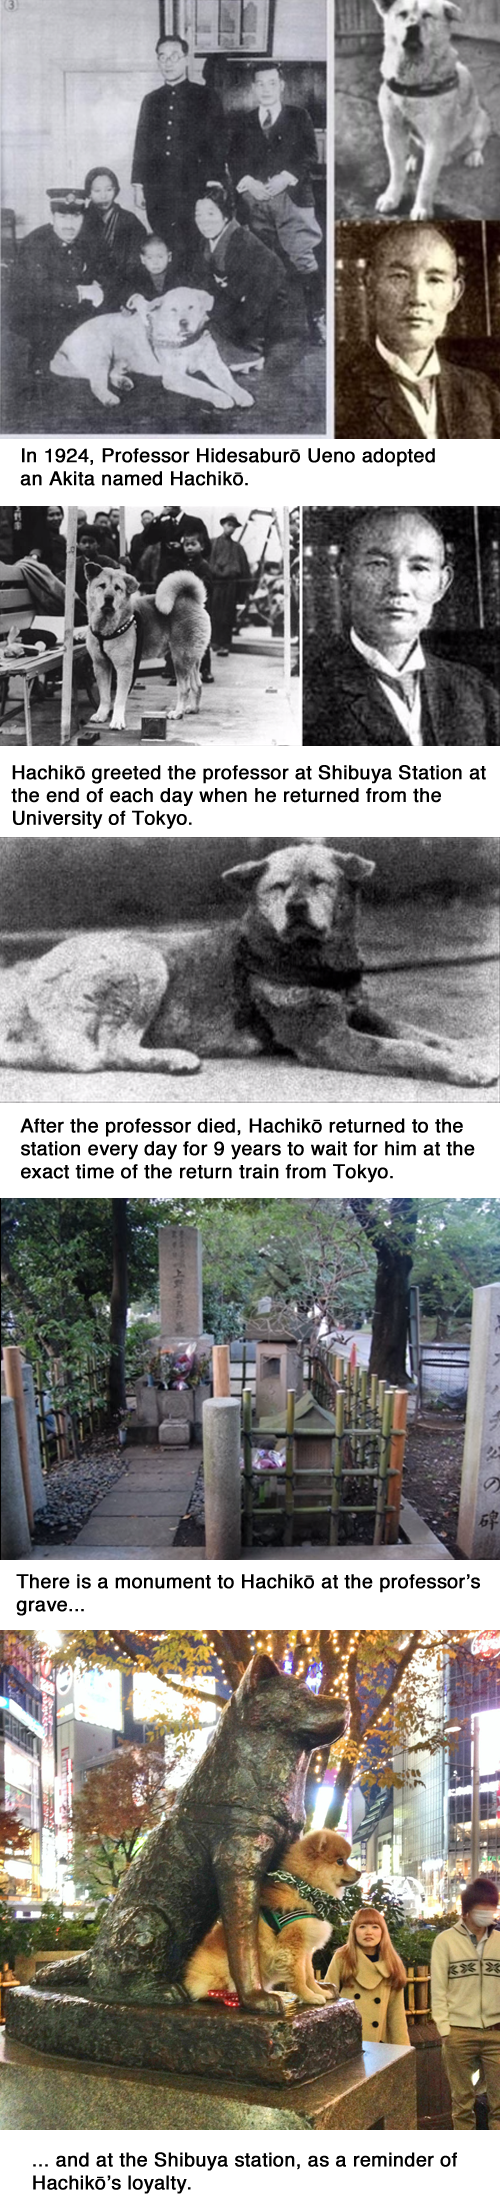 Hachiko: The dog who waited for his owner at the train station: | 14 Pictures That Prove Animals Are Better Than